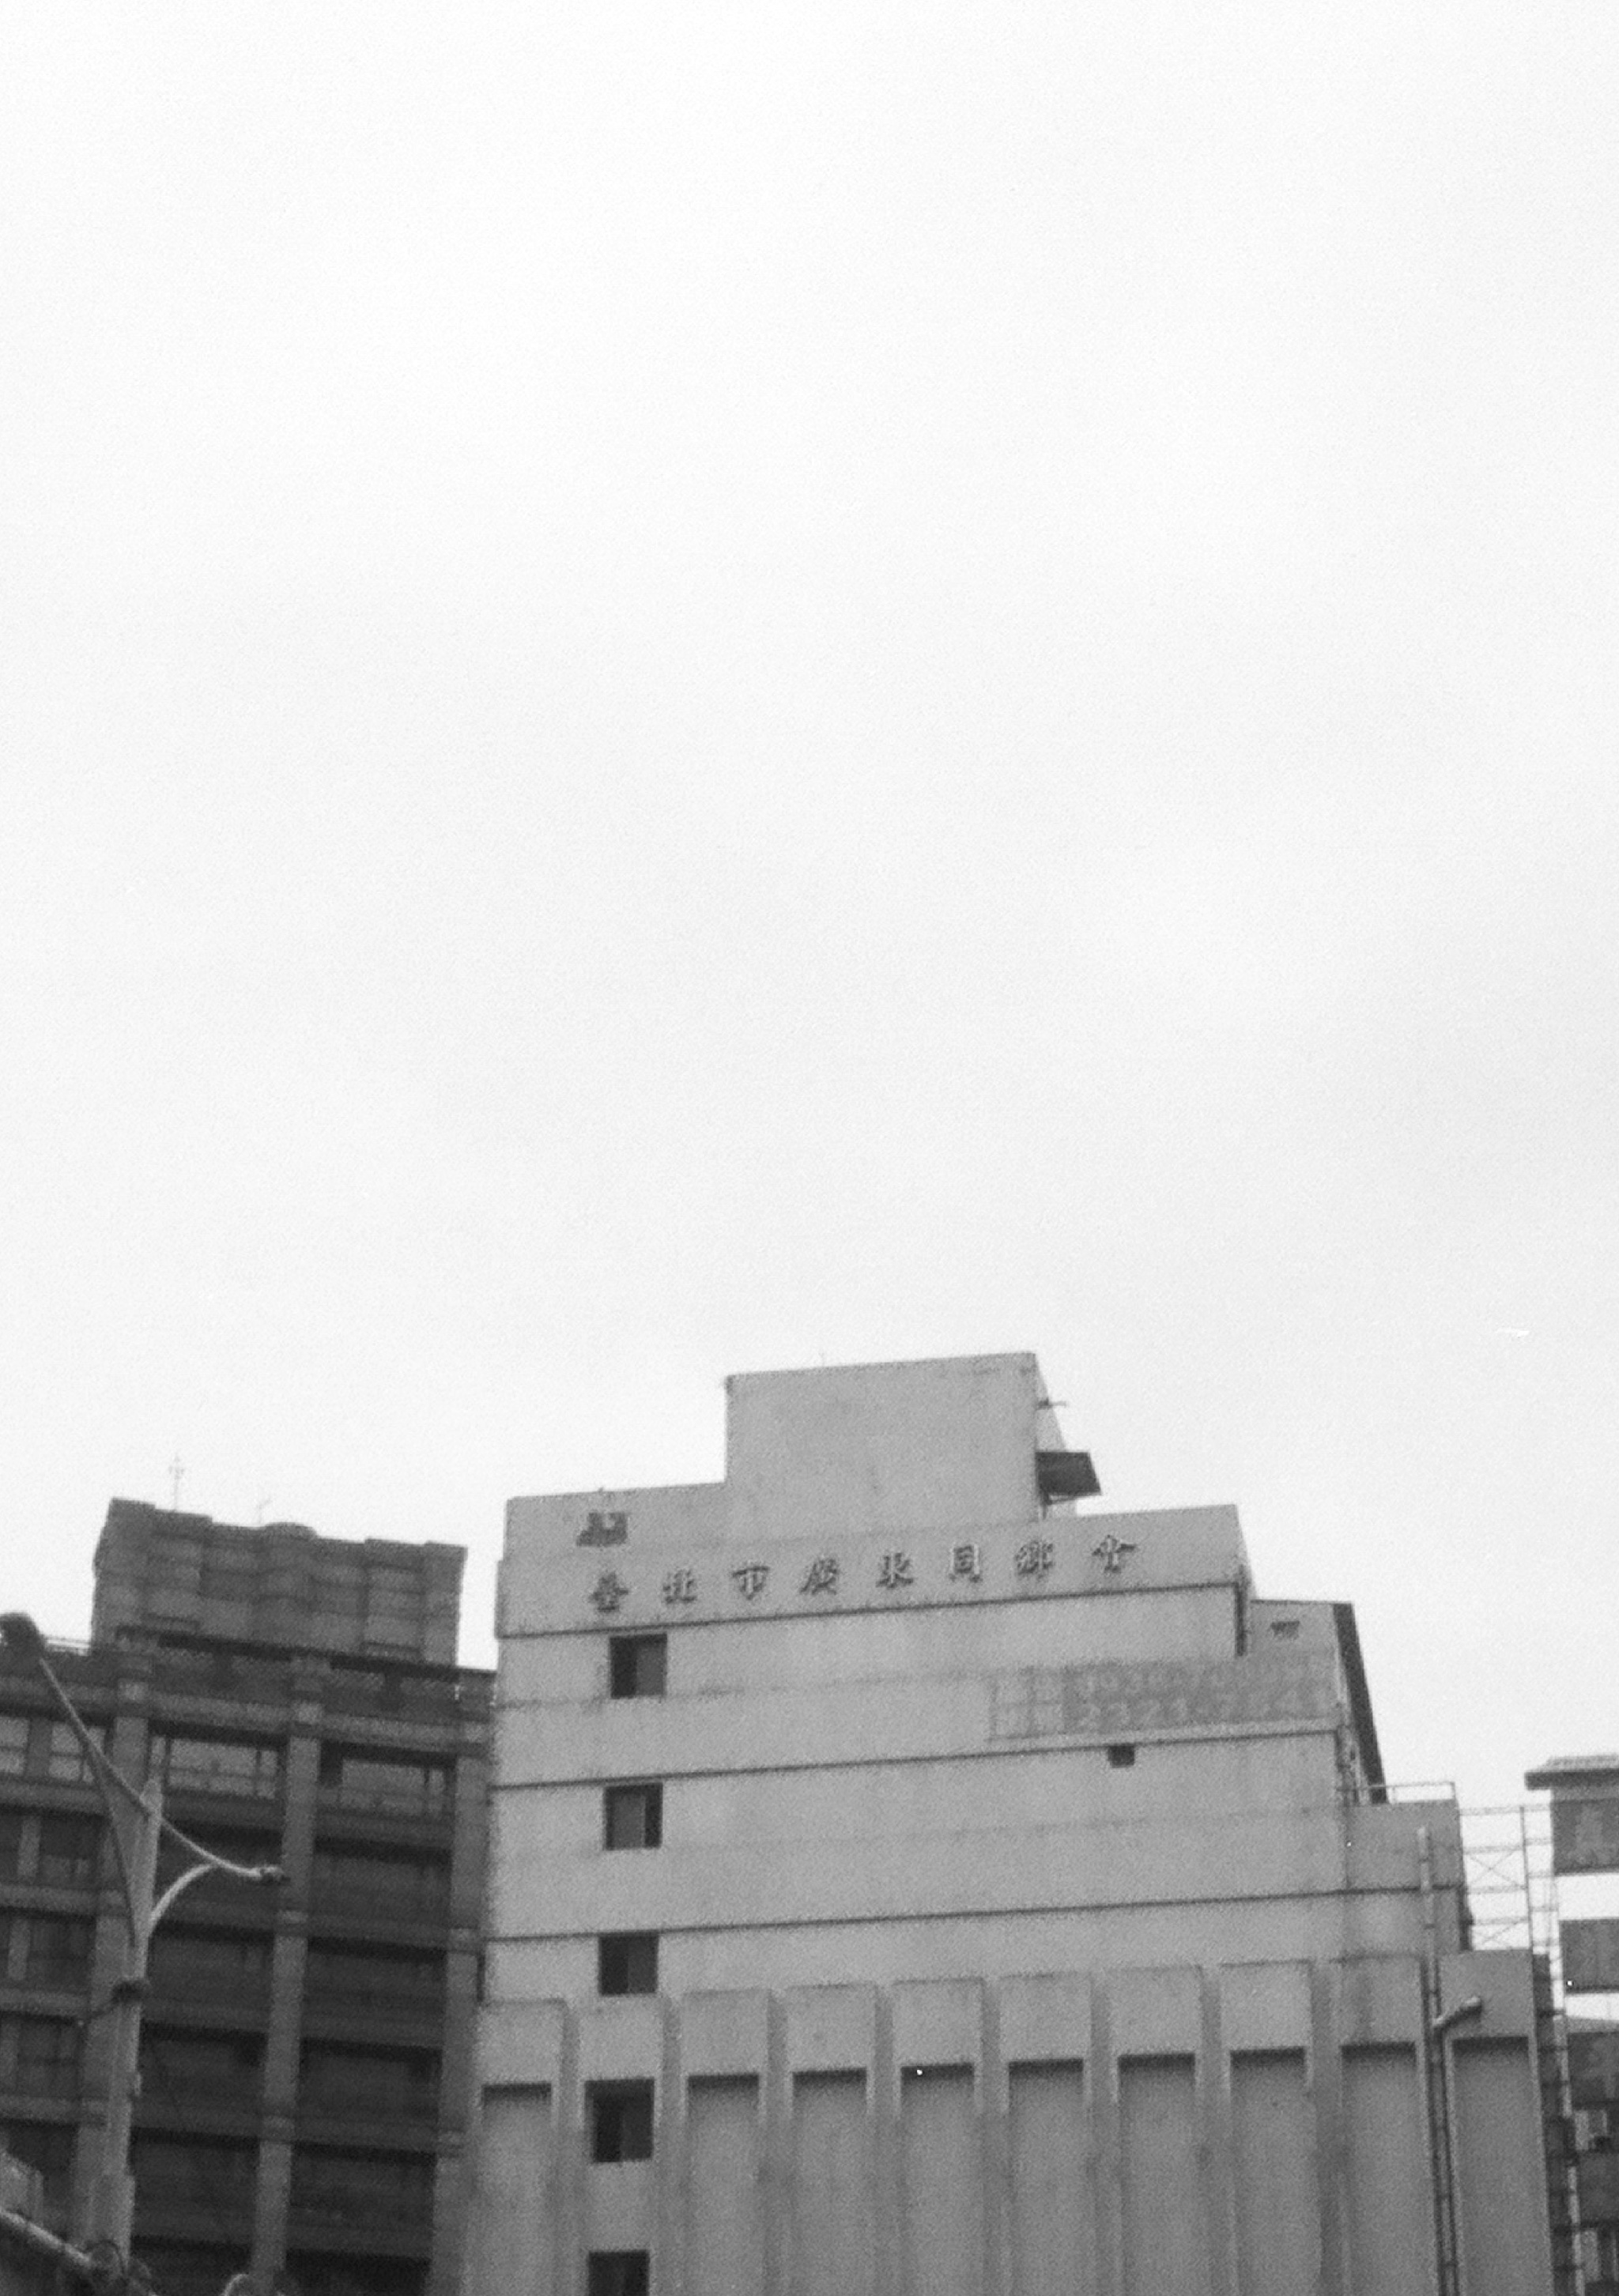 A building with sign reading Taipei Guan Dong Association.